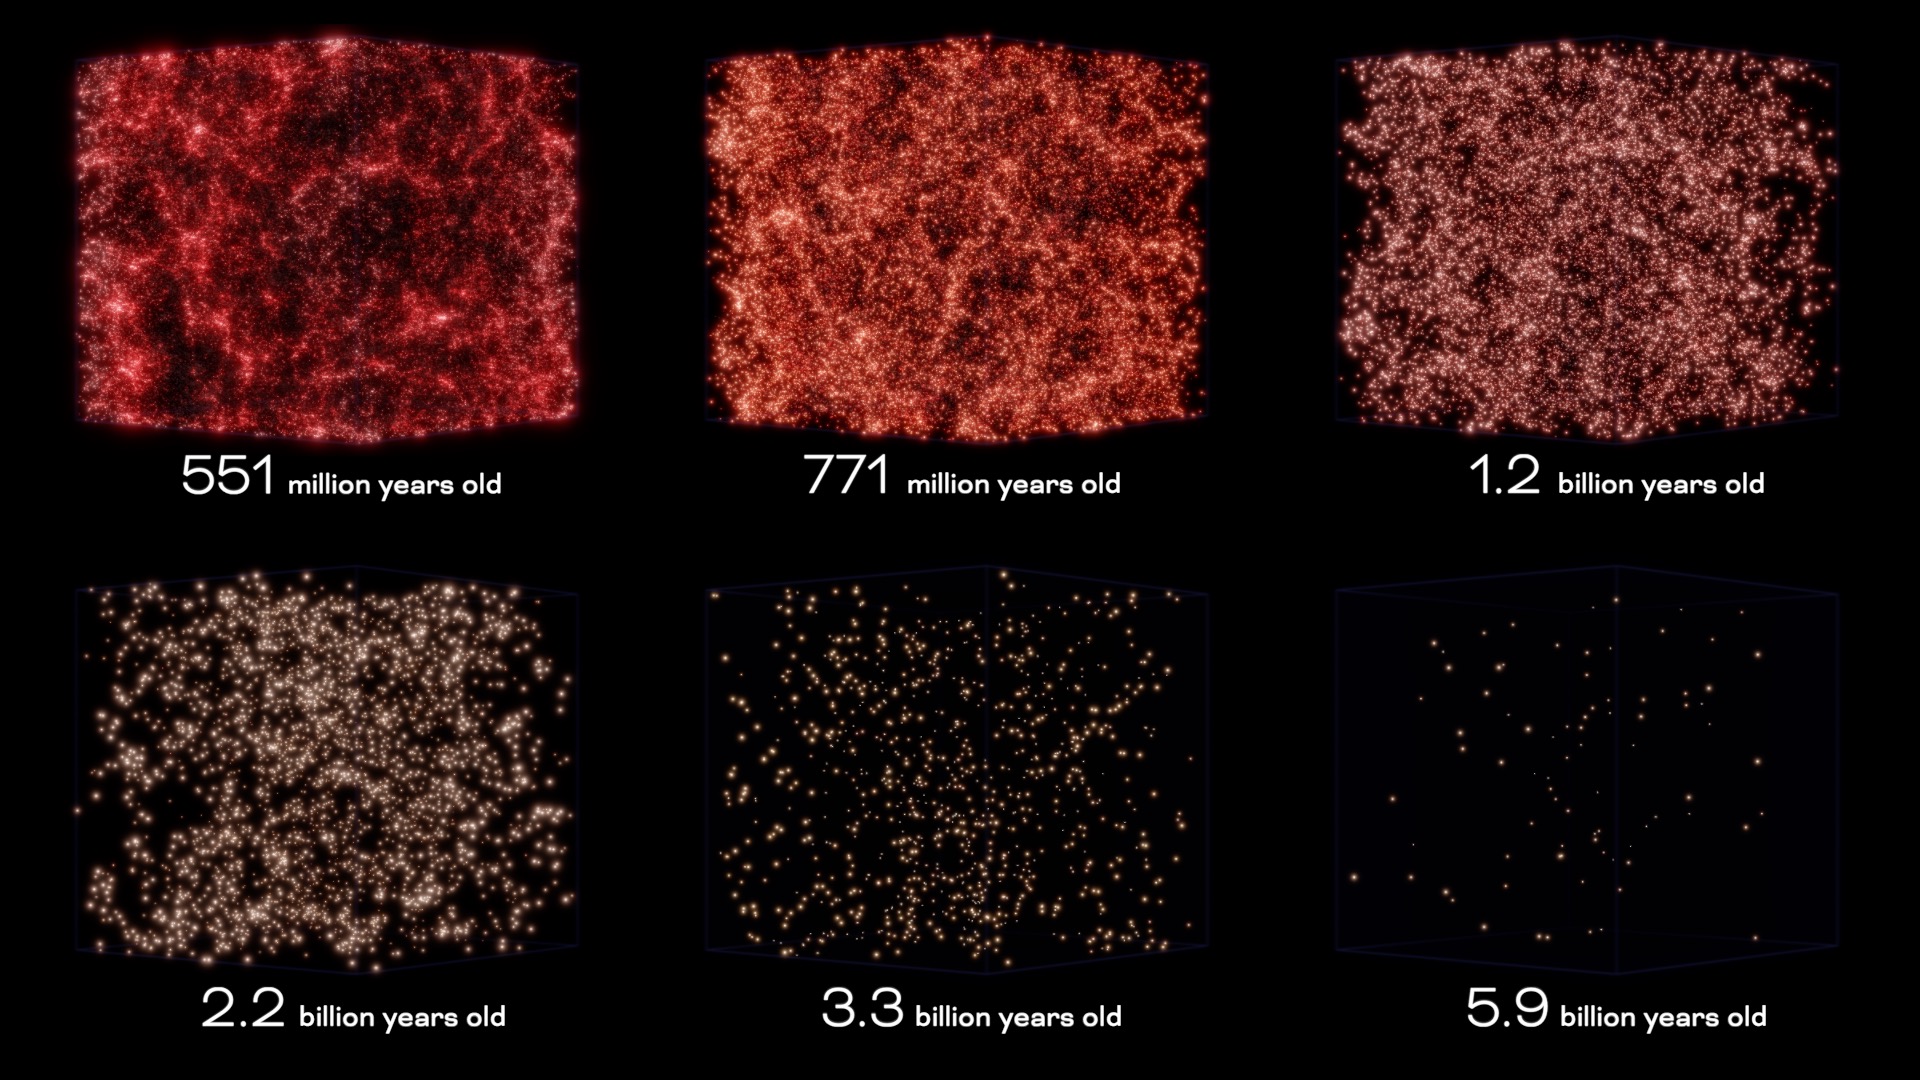 Roman simulated distribution of galaxies